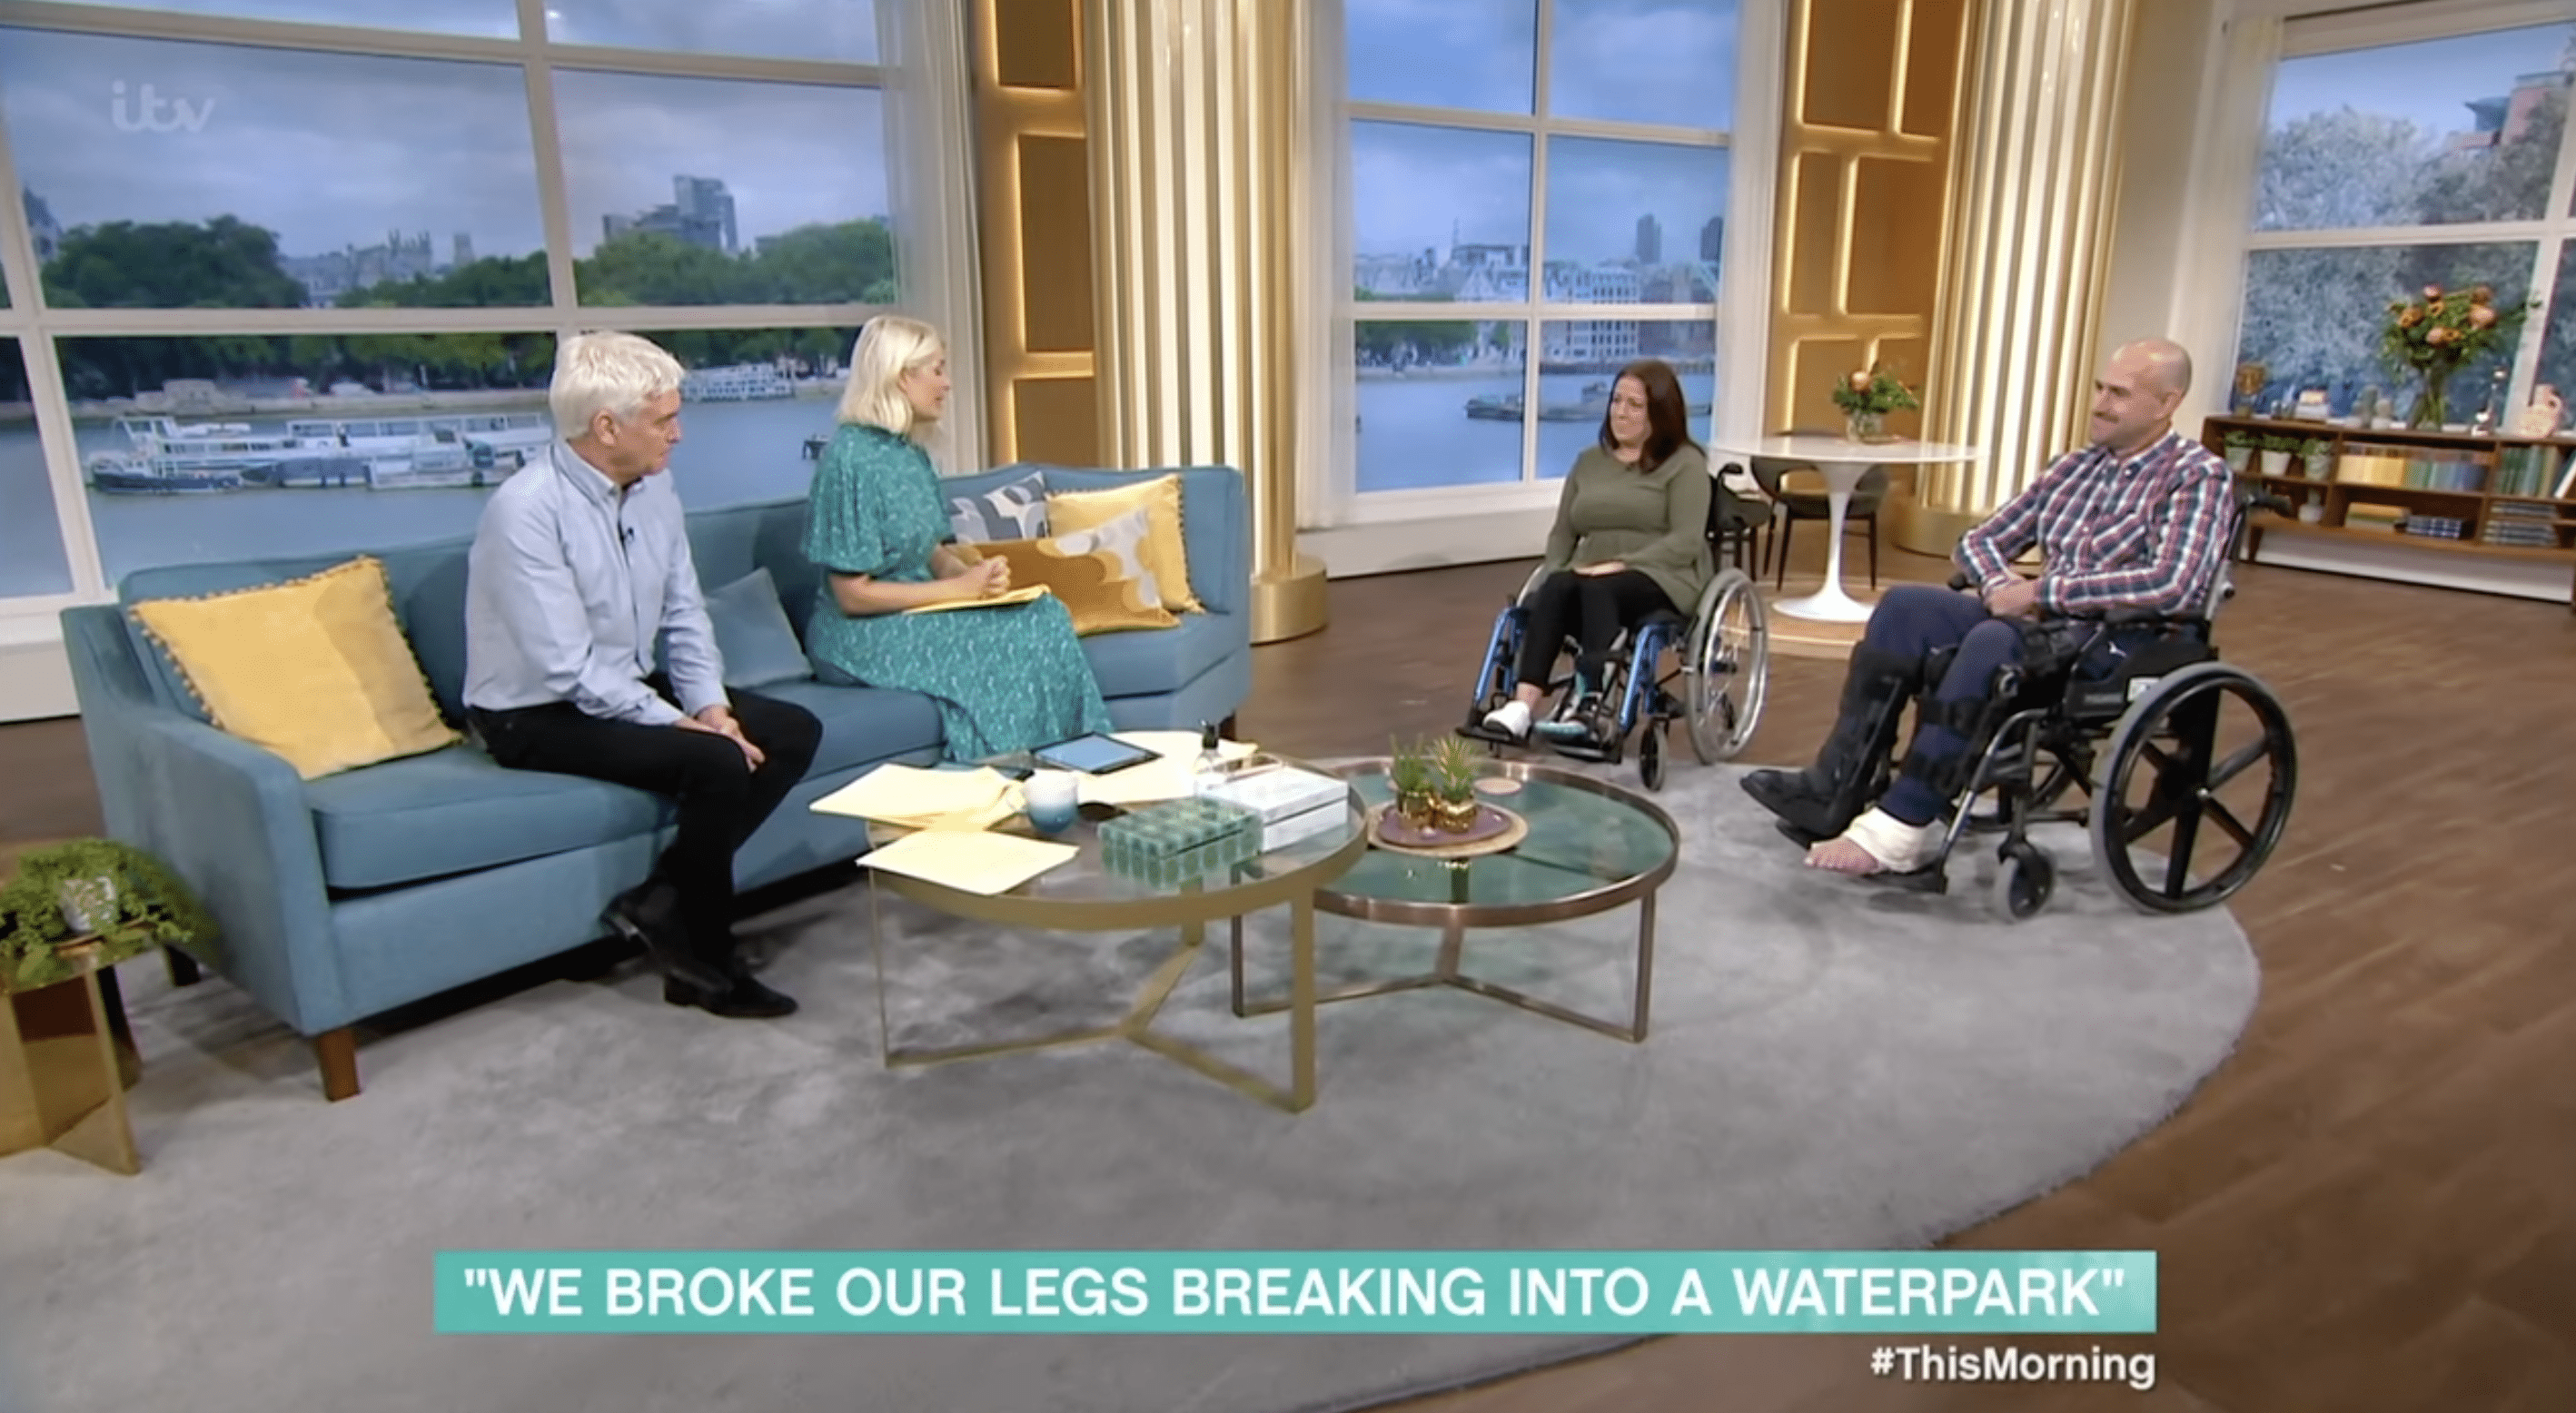 Claire Vickers and Barry Douglas shared the story of their horrible accident with "ThisMorning." | Photo: YouTube.com/ThisMorning